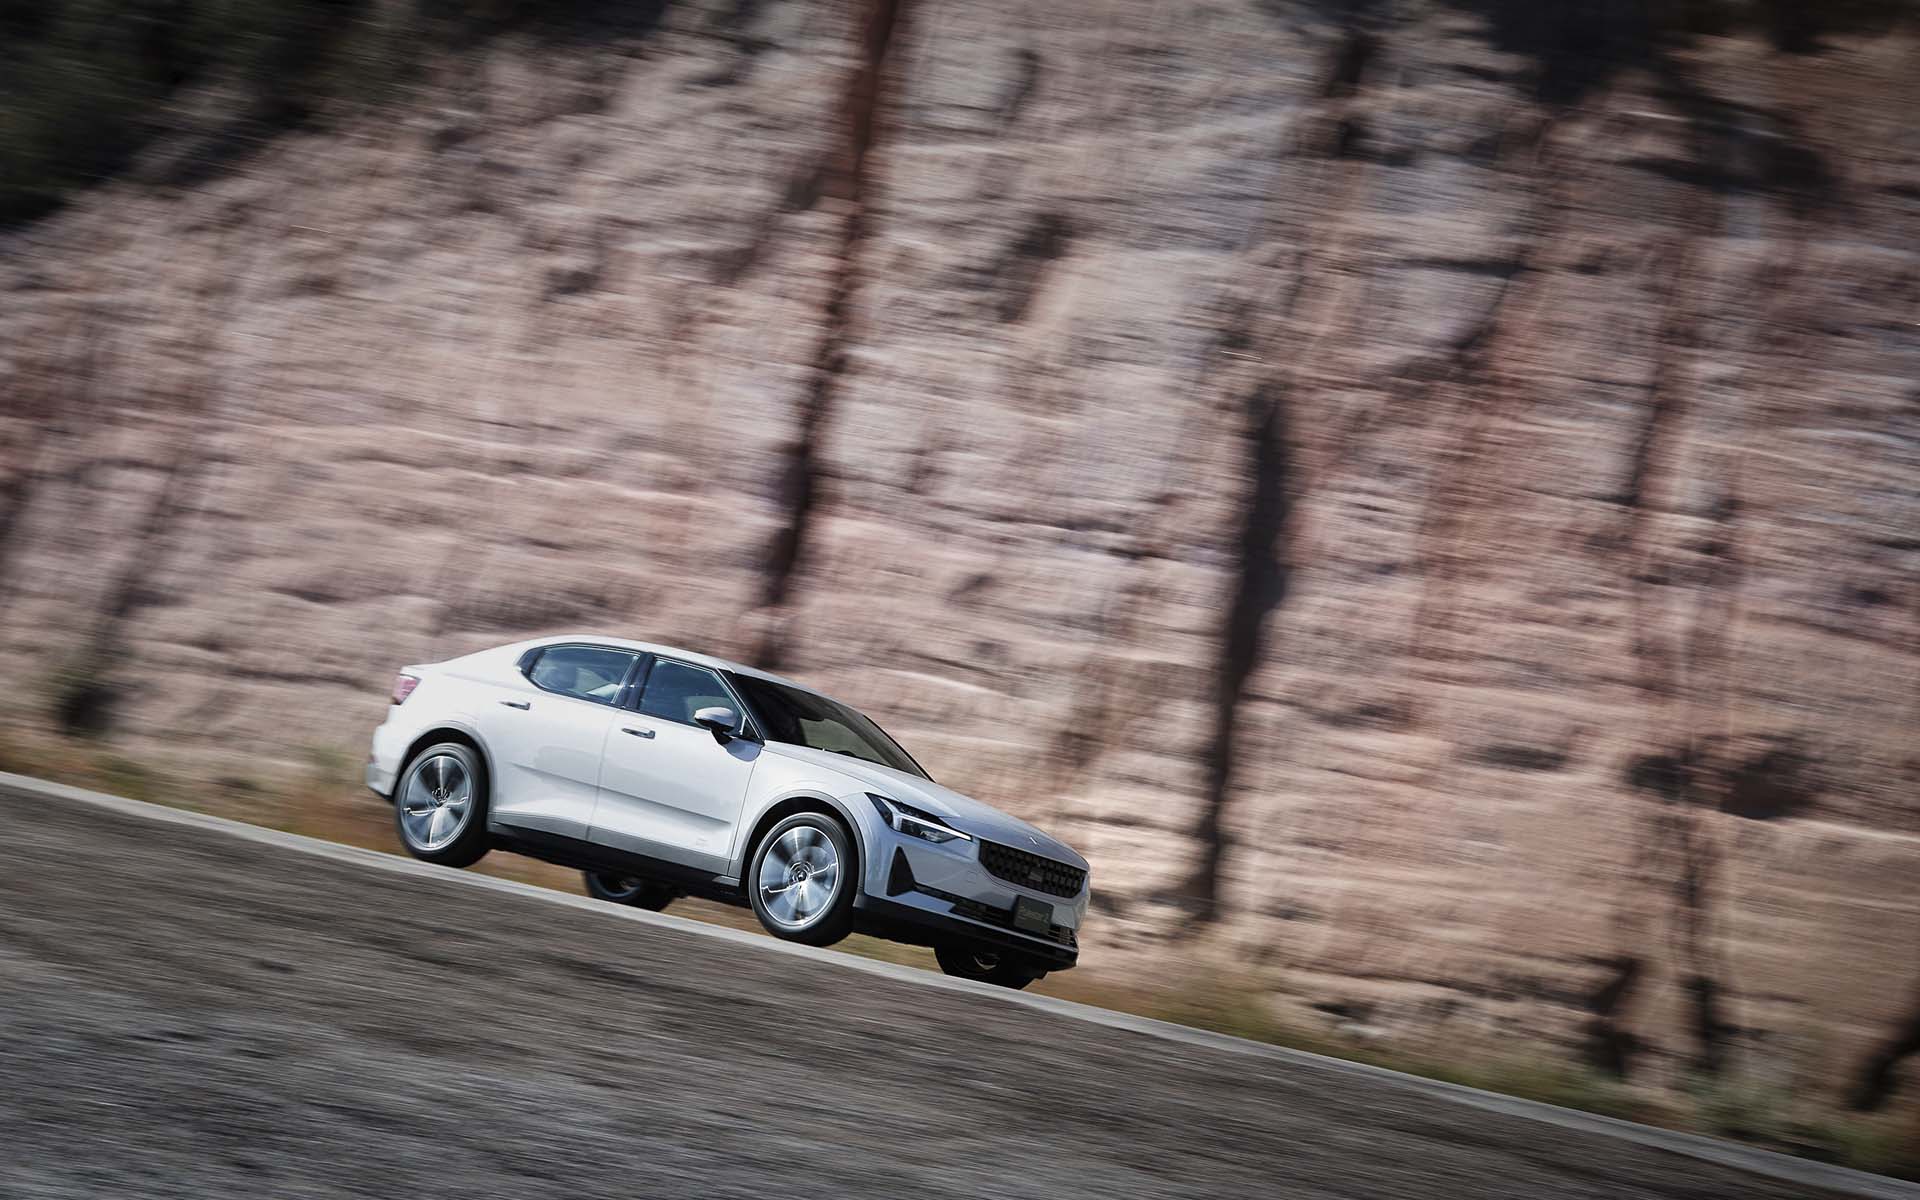 First drive review: 2022 Polestar 2 single motor beats Tesla on build quality, remixes prioritiesFirst drive review: 2022 Polestar 2 single motor beats Tesla on build quality, remixes priorities